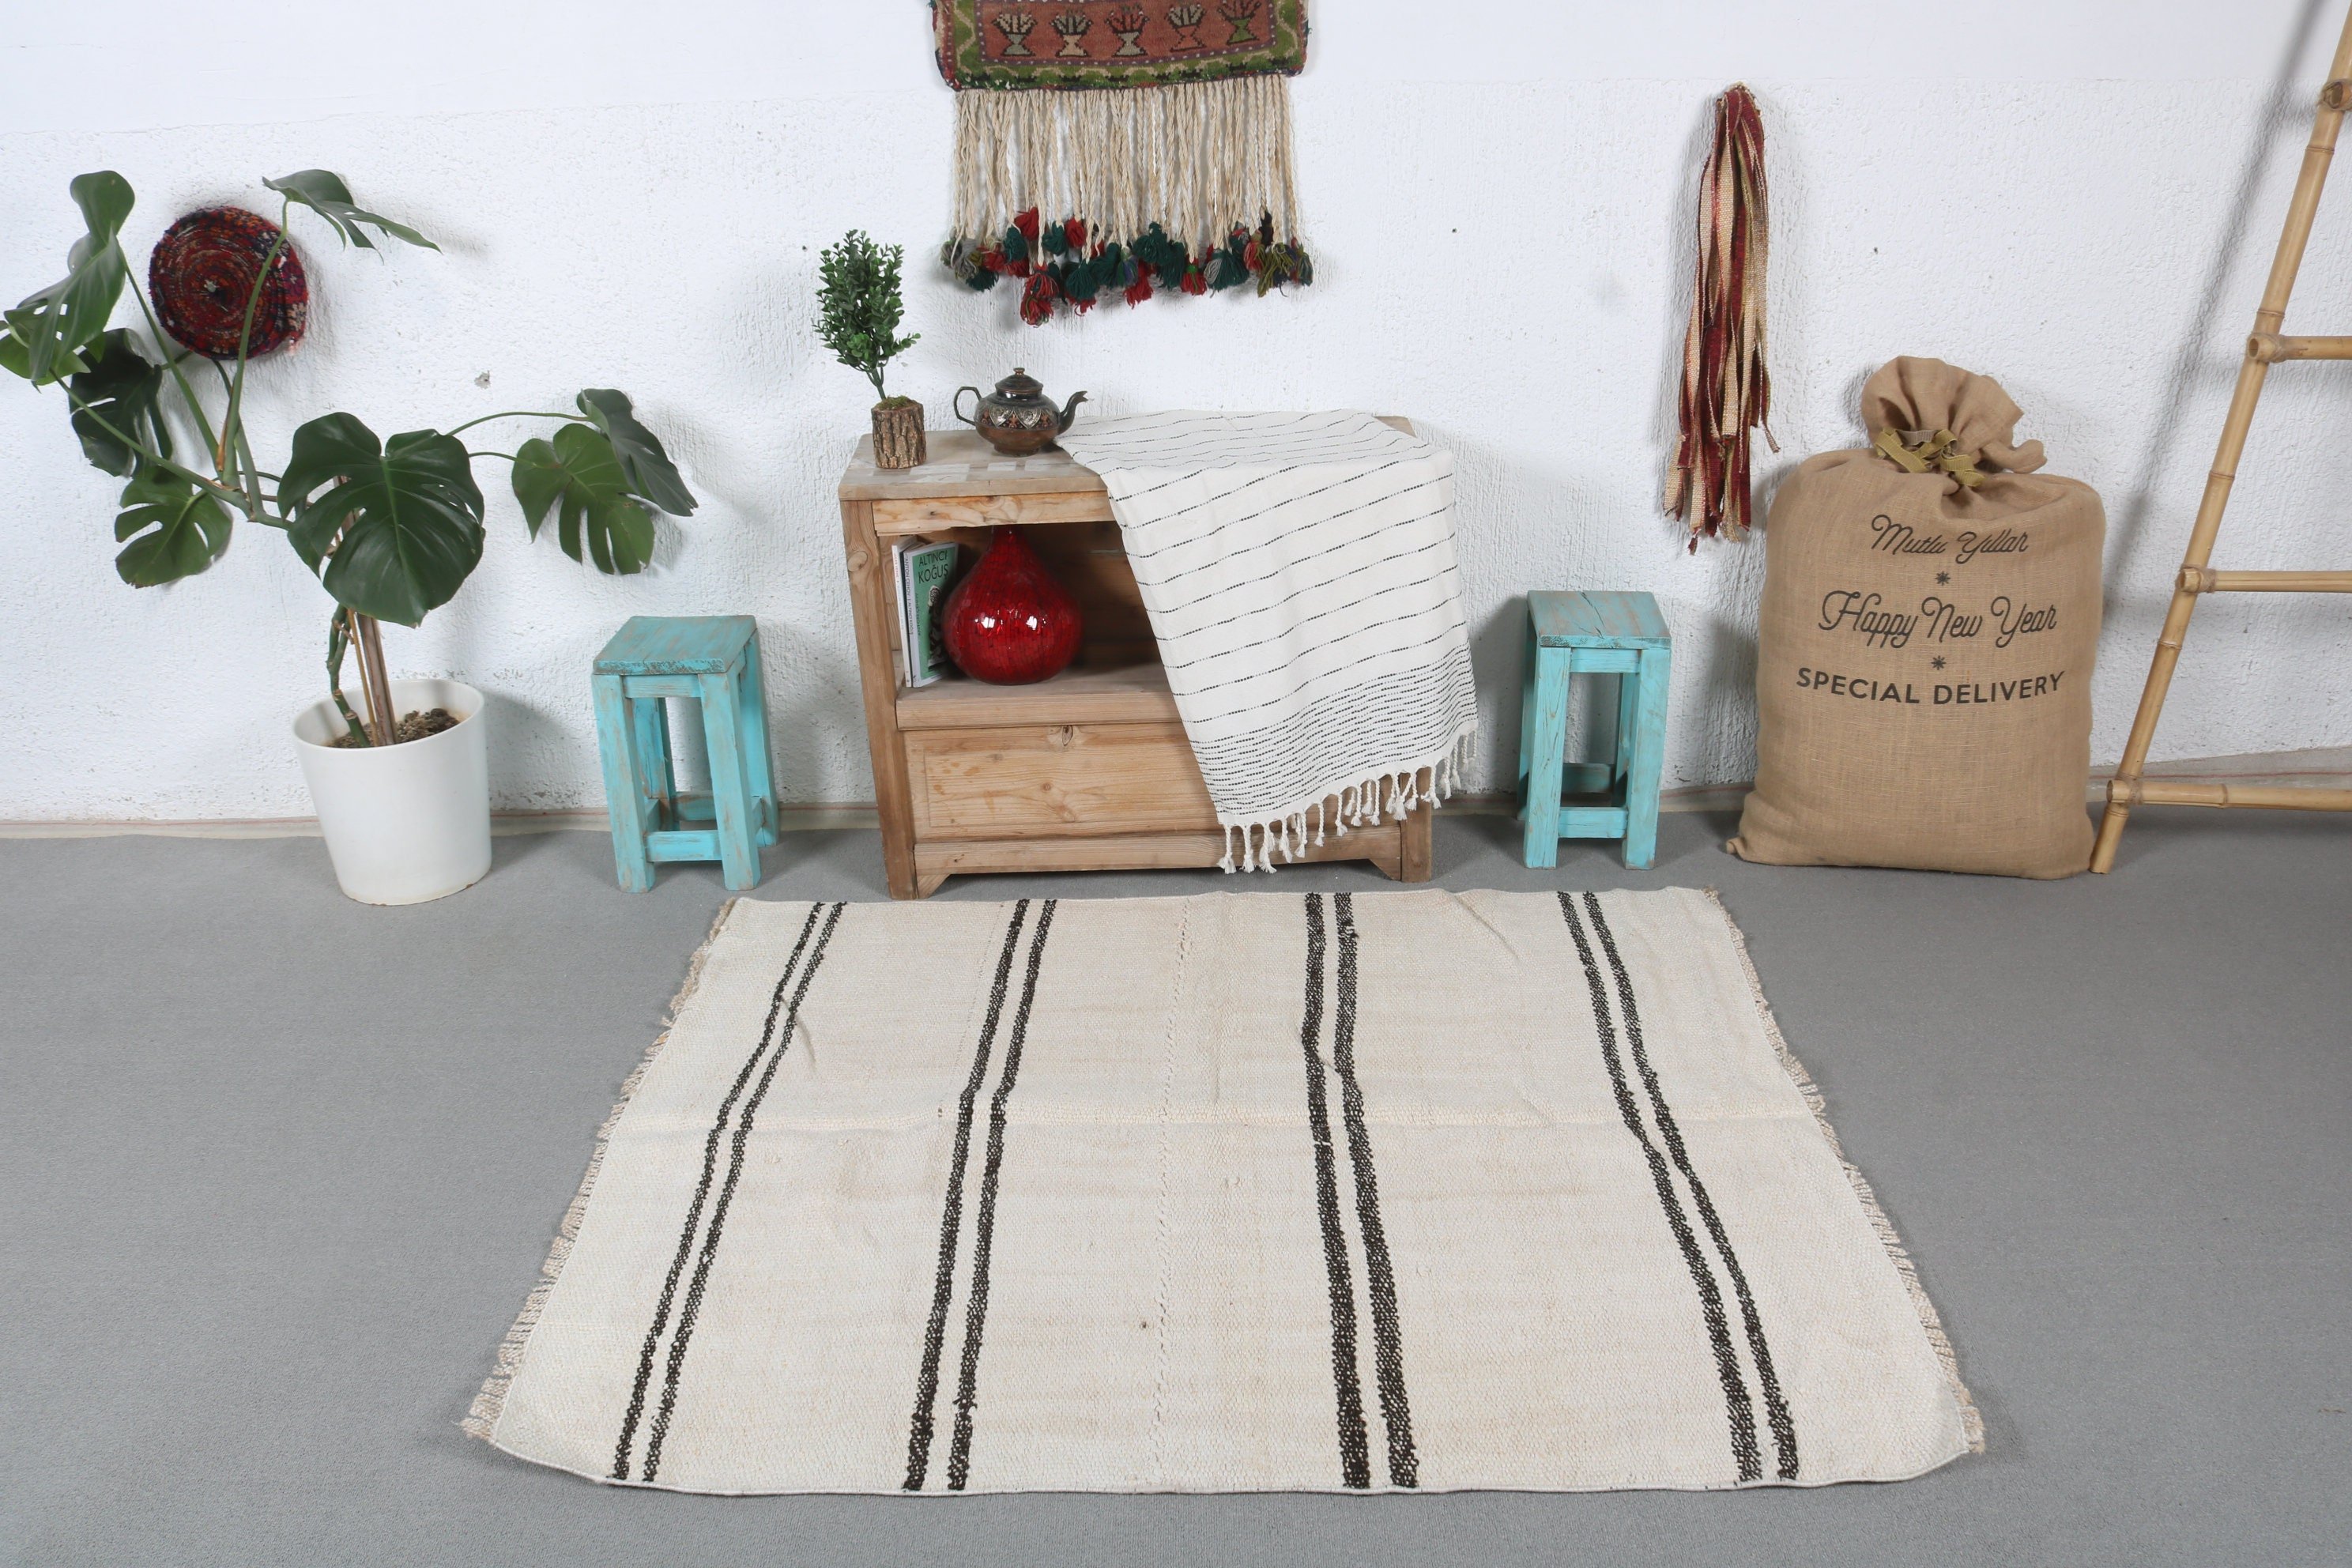 Vintage Rugs, Rugs for Nursery, Home Decor Rug, Turkish Rugs, 3.8x4.7 ft Accent Rugs, White Bedroom Rug, Kitchen Rugs, Wool Rug, Entry Rug